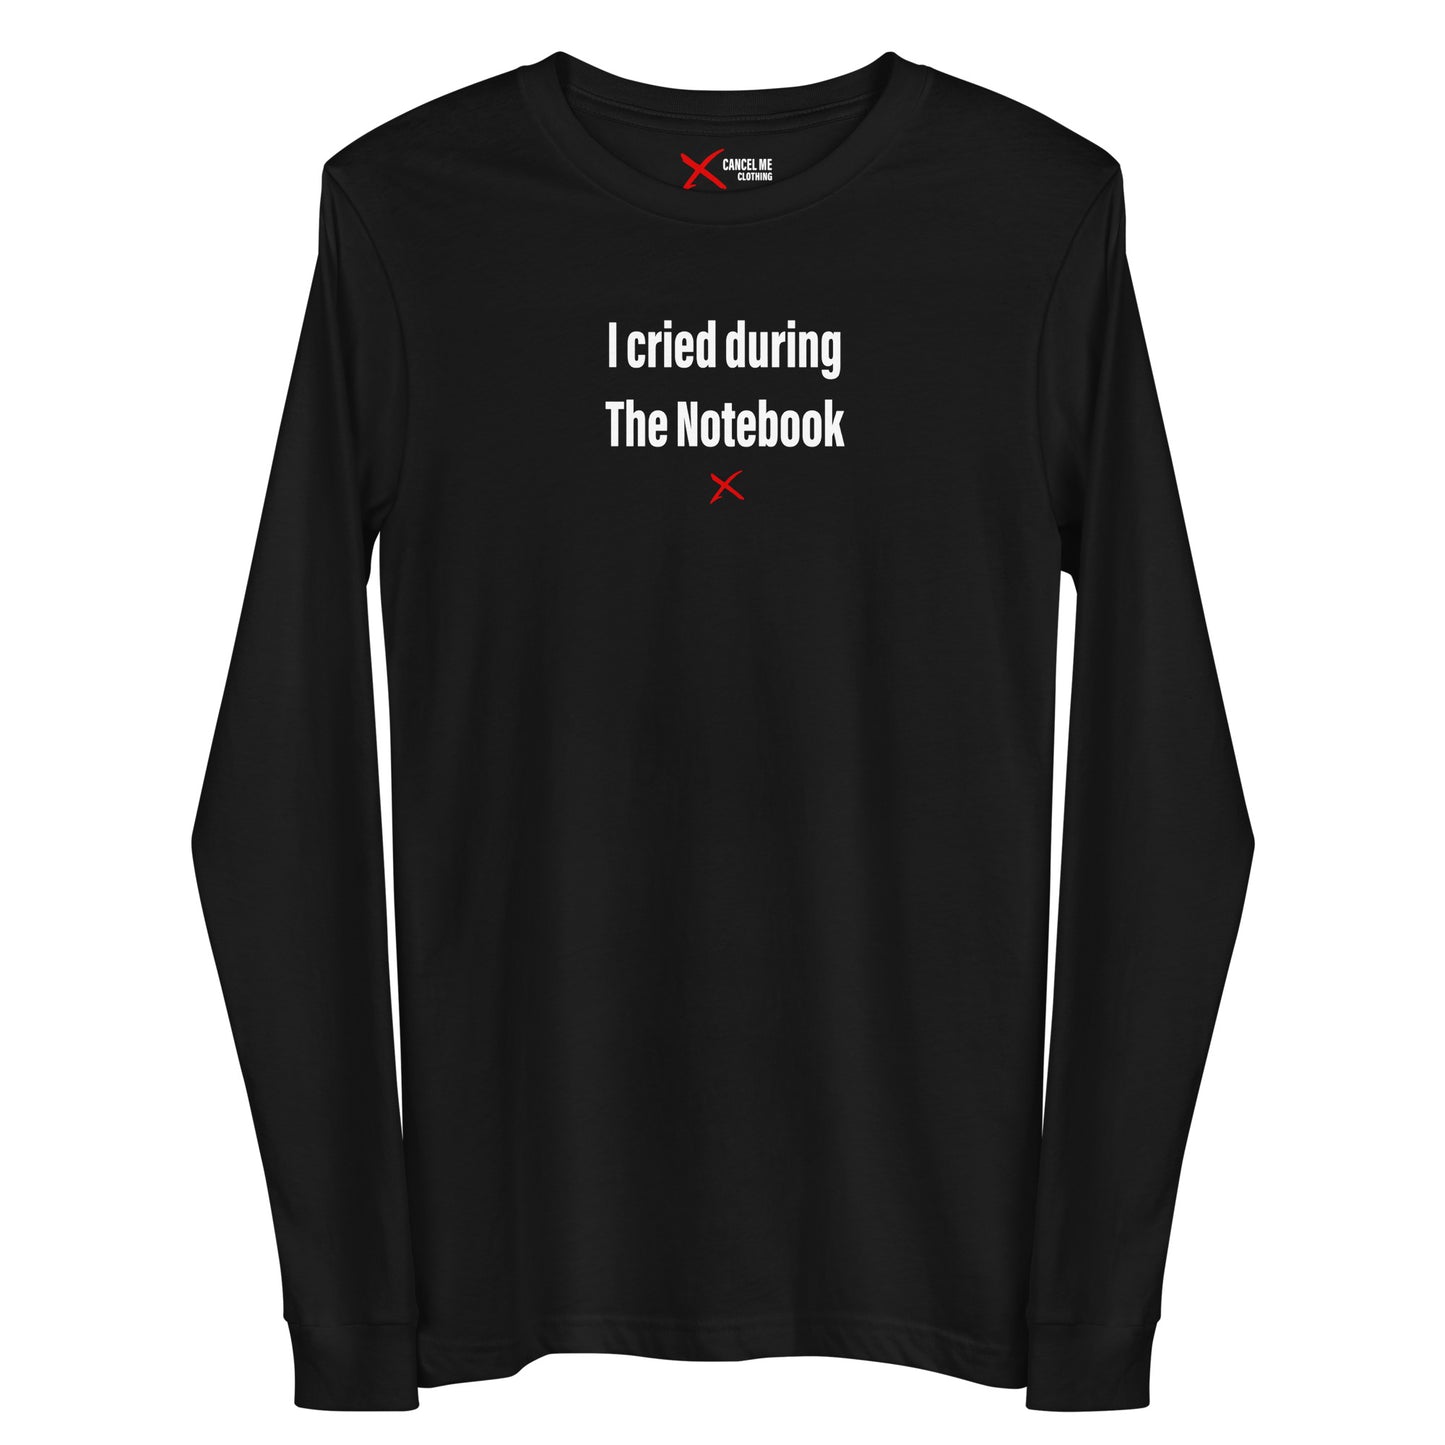 I cried during The Notebook - Longsleeve